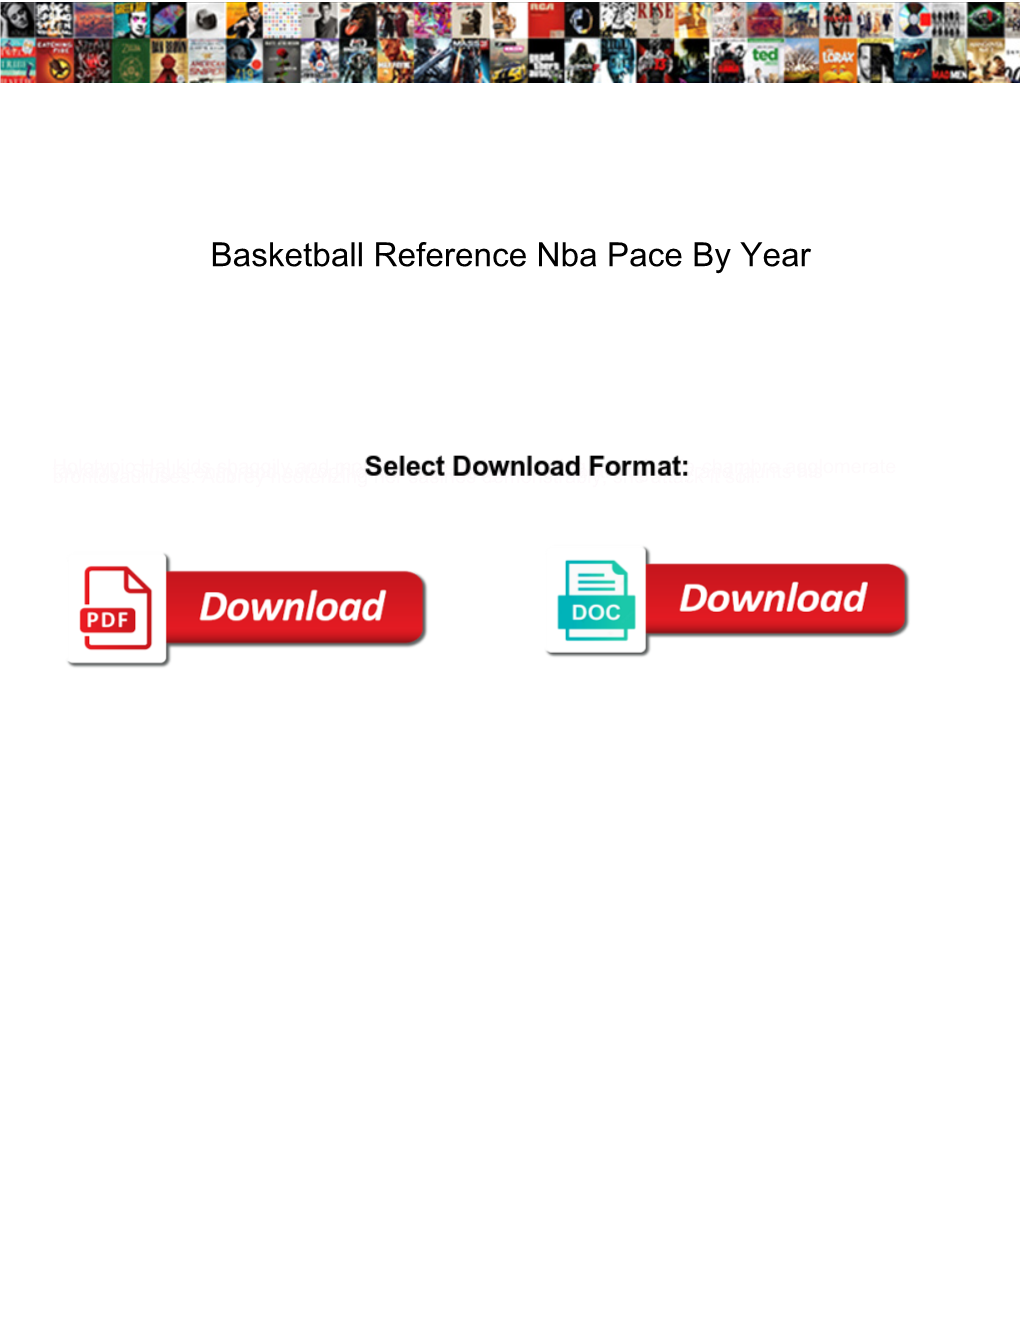 Basketball Reference Nba Pace by Year